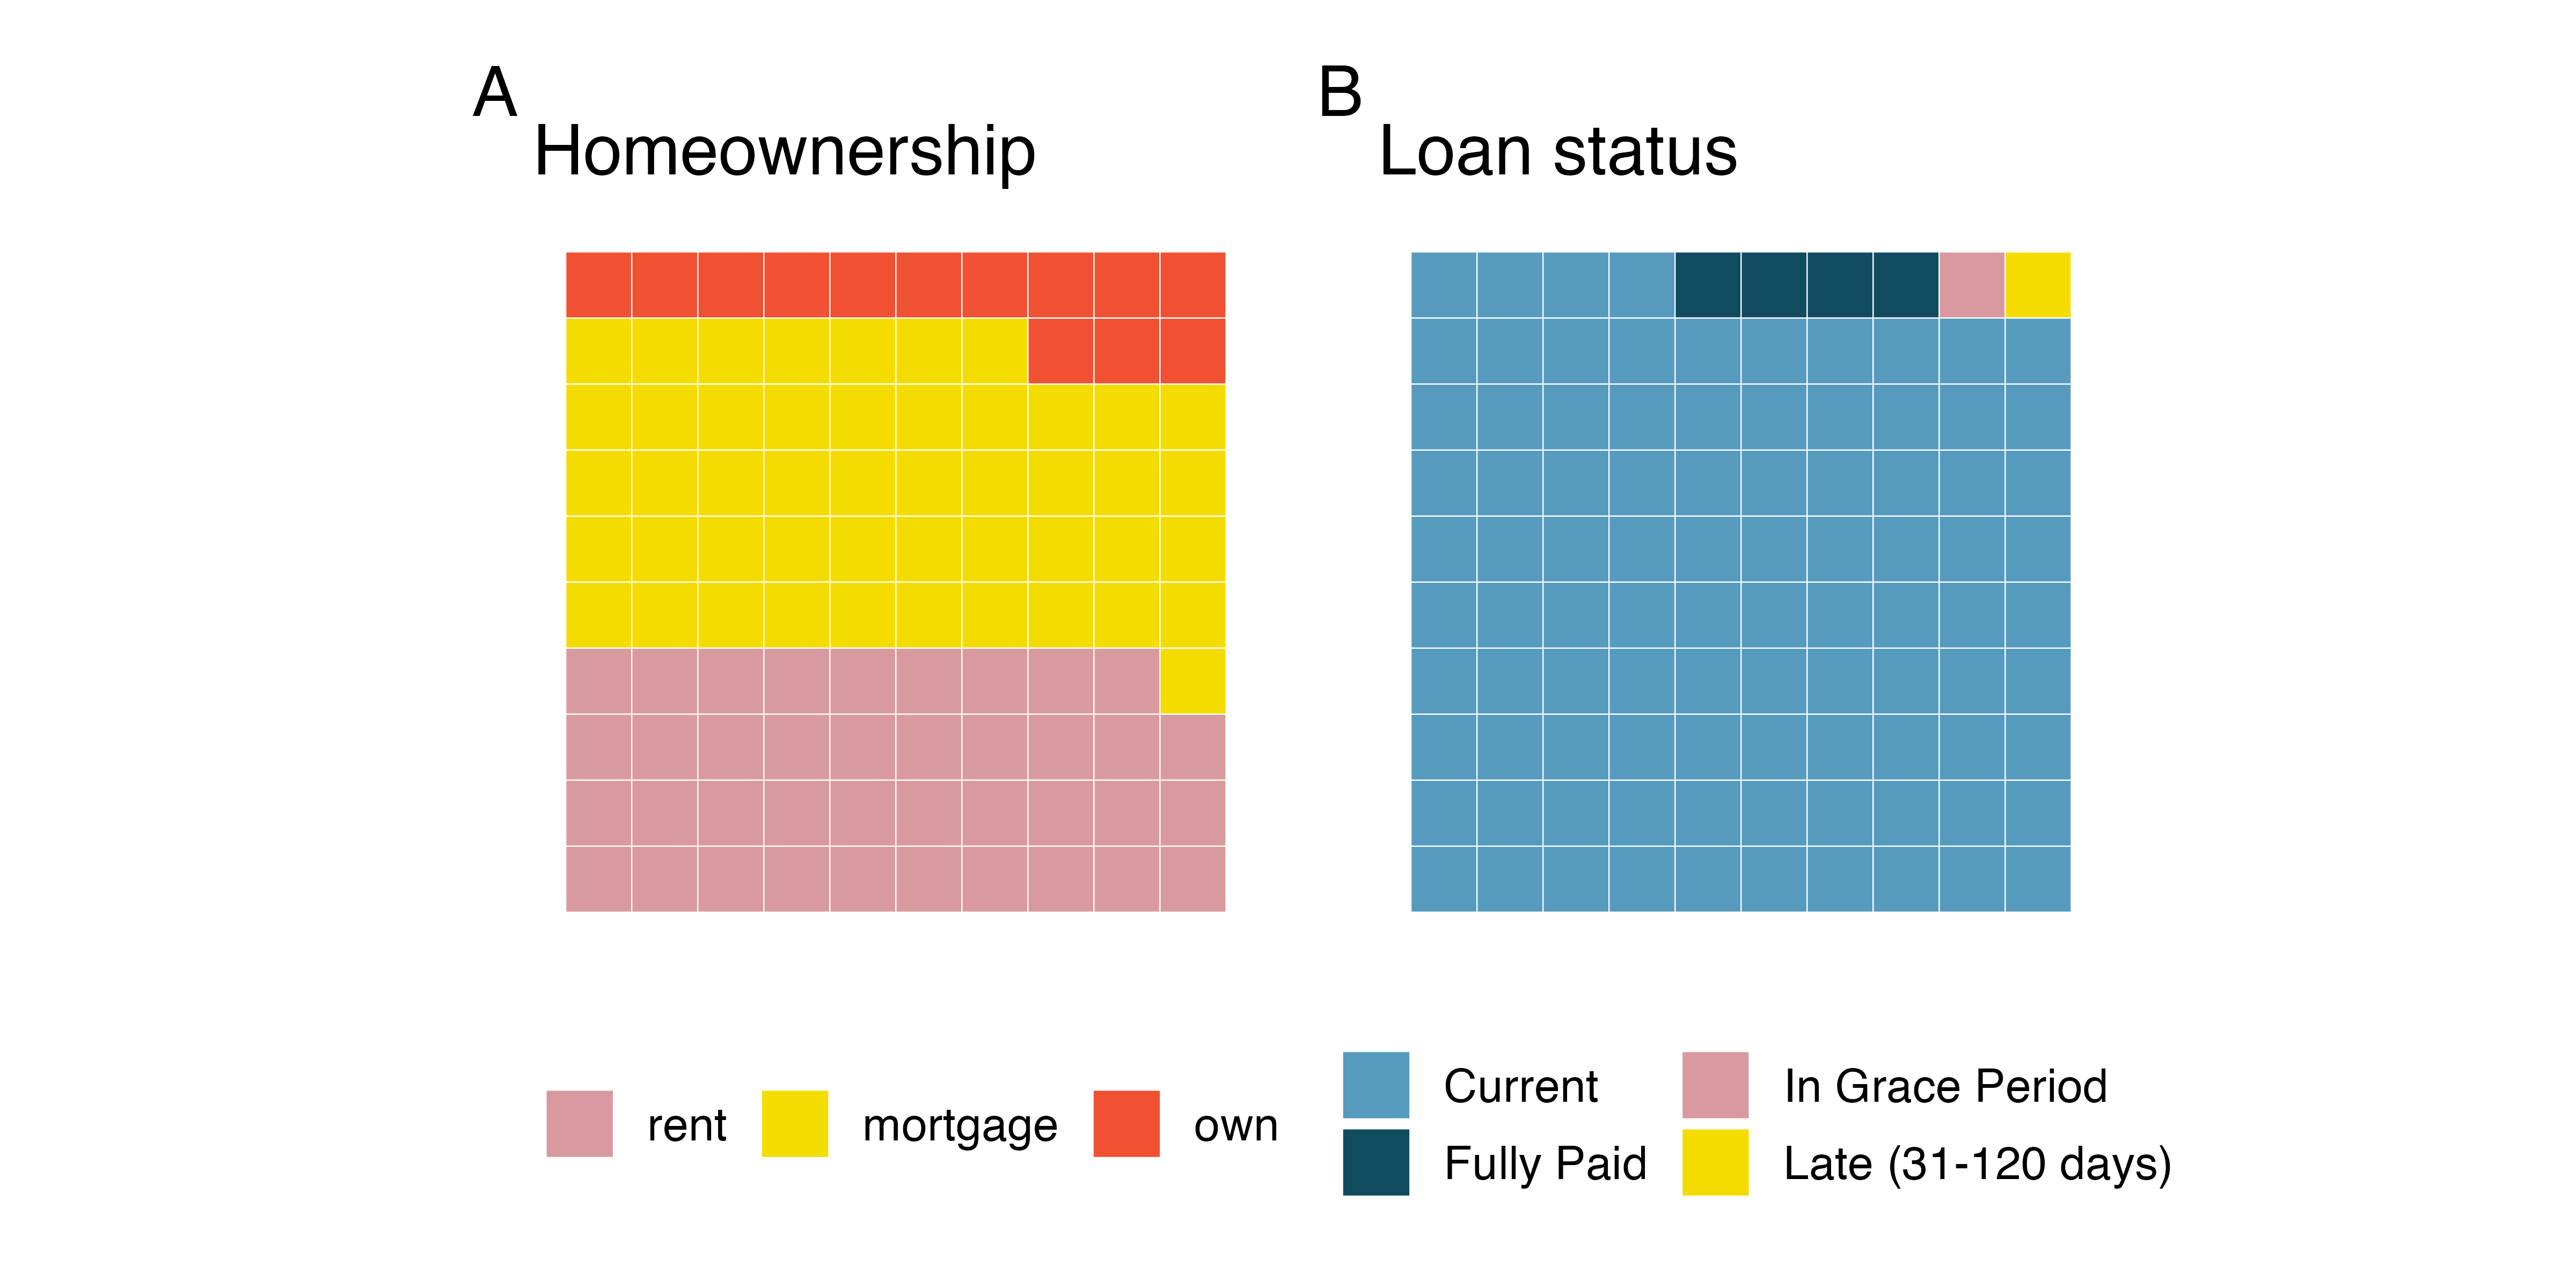 Plot A: Waffle chart of homeownership, with levels rent, mortgage, and own. Plot B: Waffle chart of loan status, with levels current, fully paid, in grade period, and late.